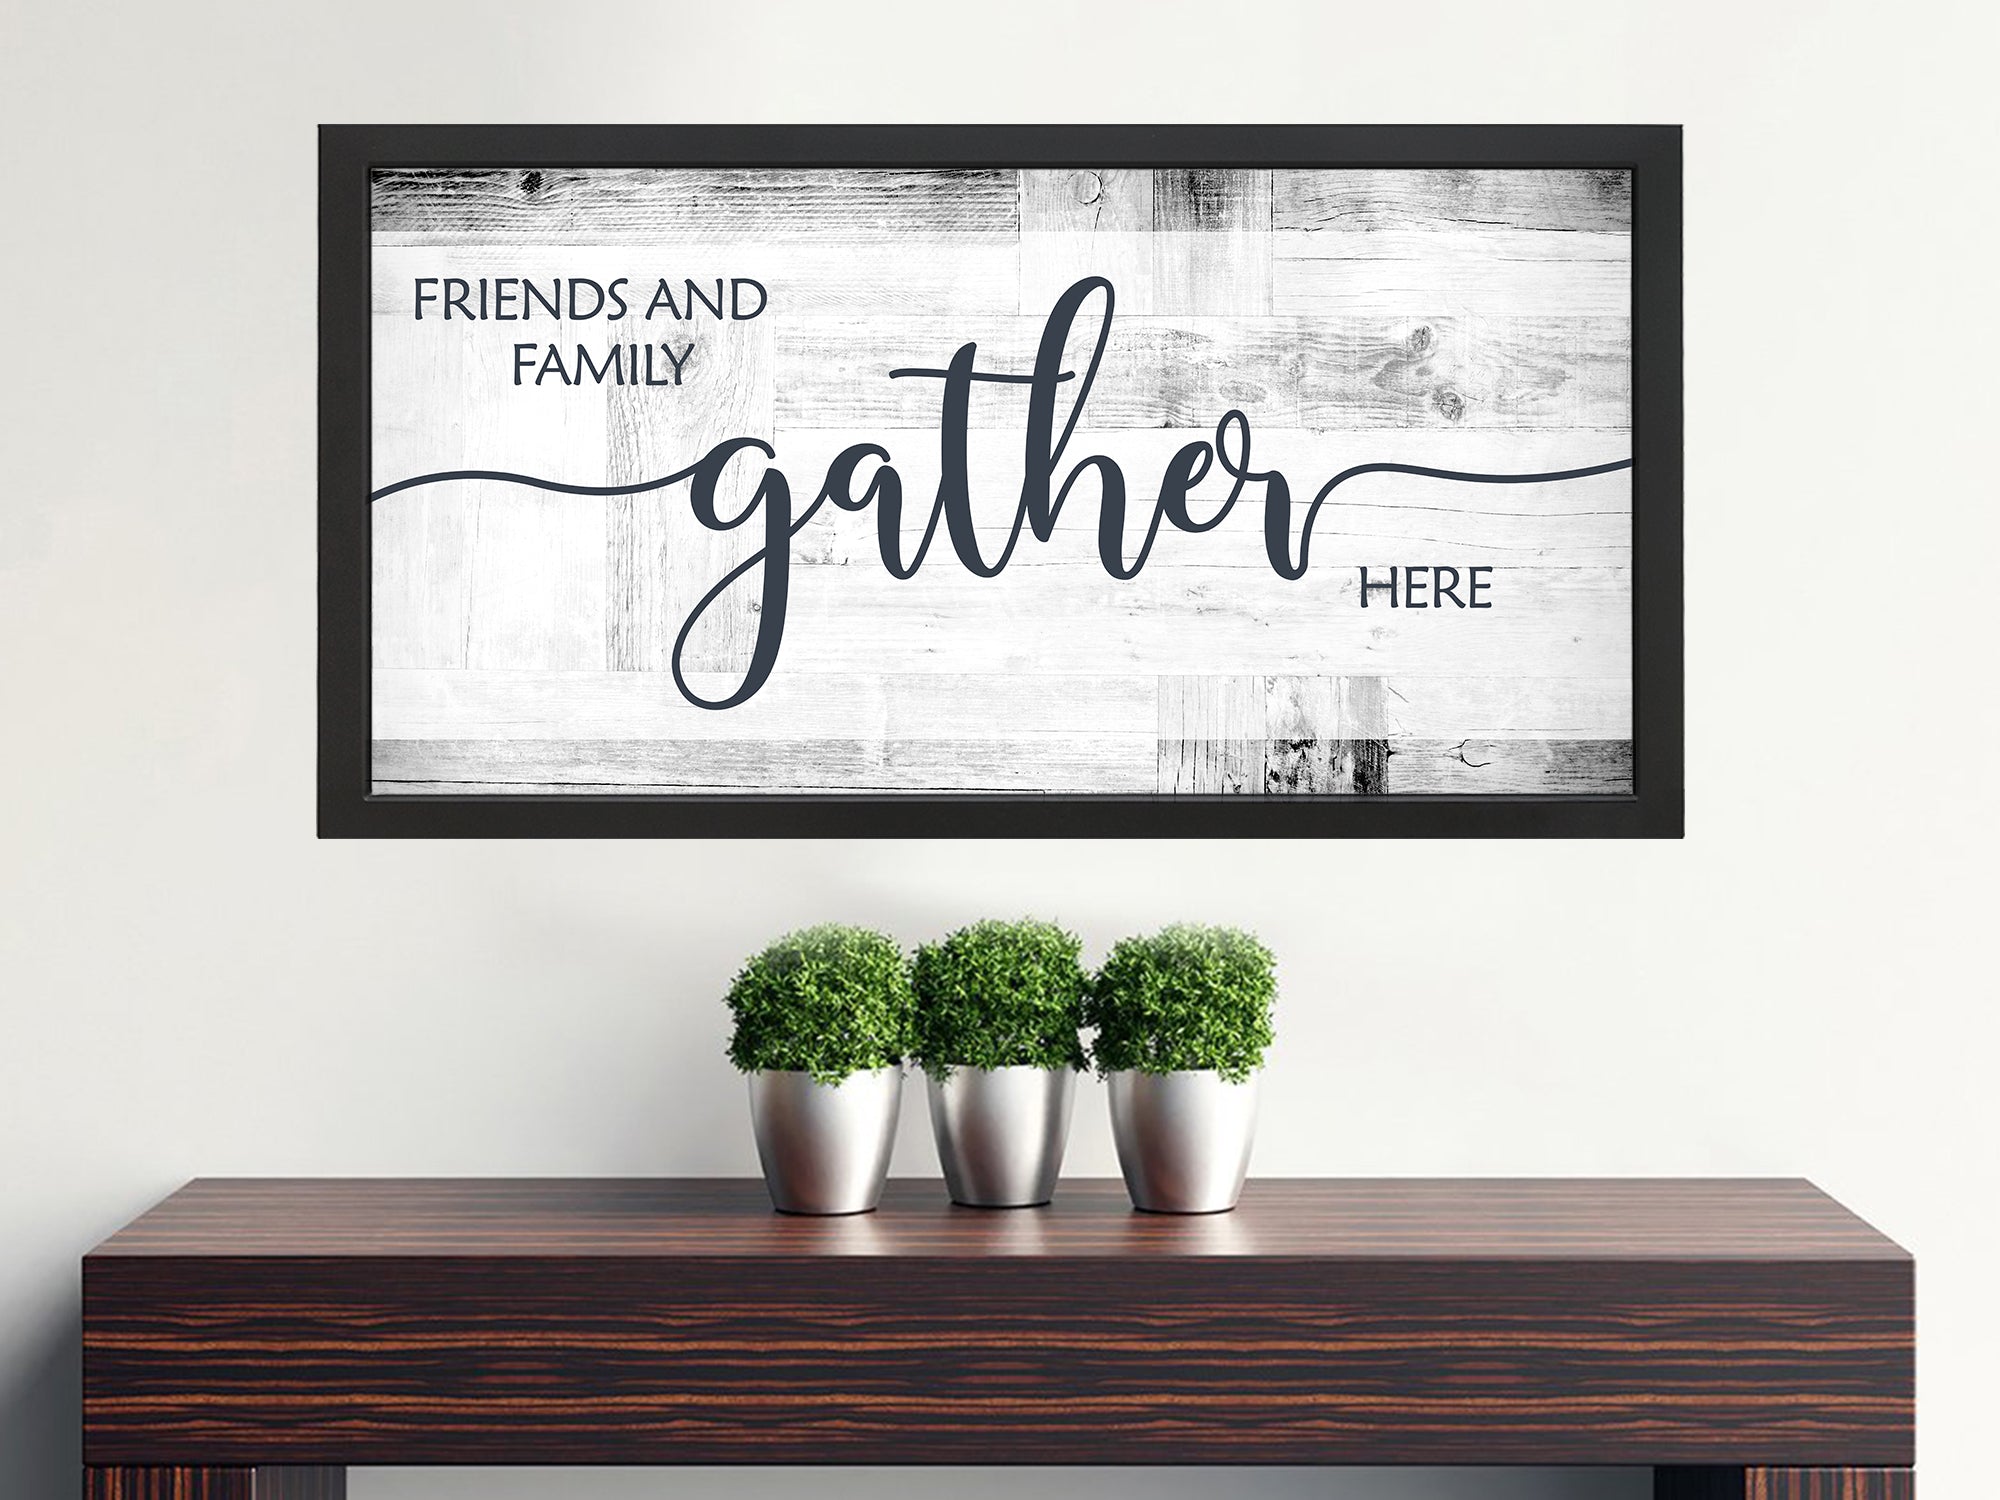 Friends and Family Gather Here - Dinning Room Canvas Wall Art